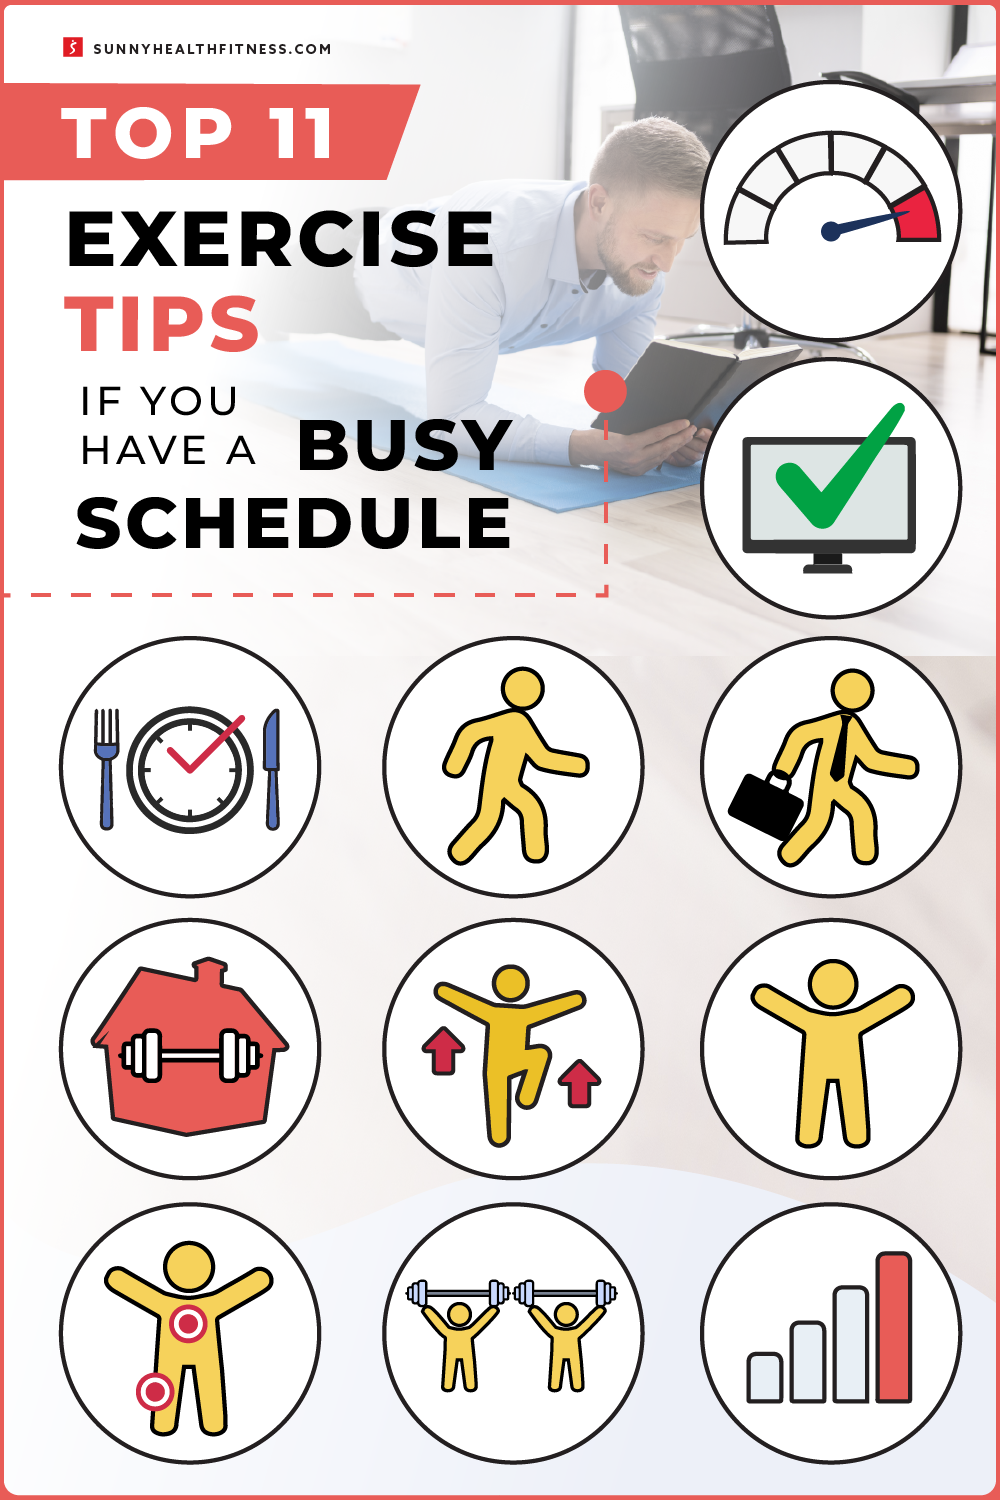 Top 11 Exercise Tips if You Have a Busy Schedule Infographic